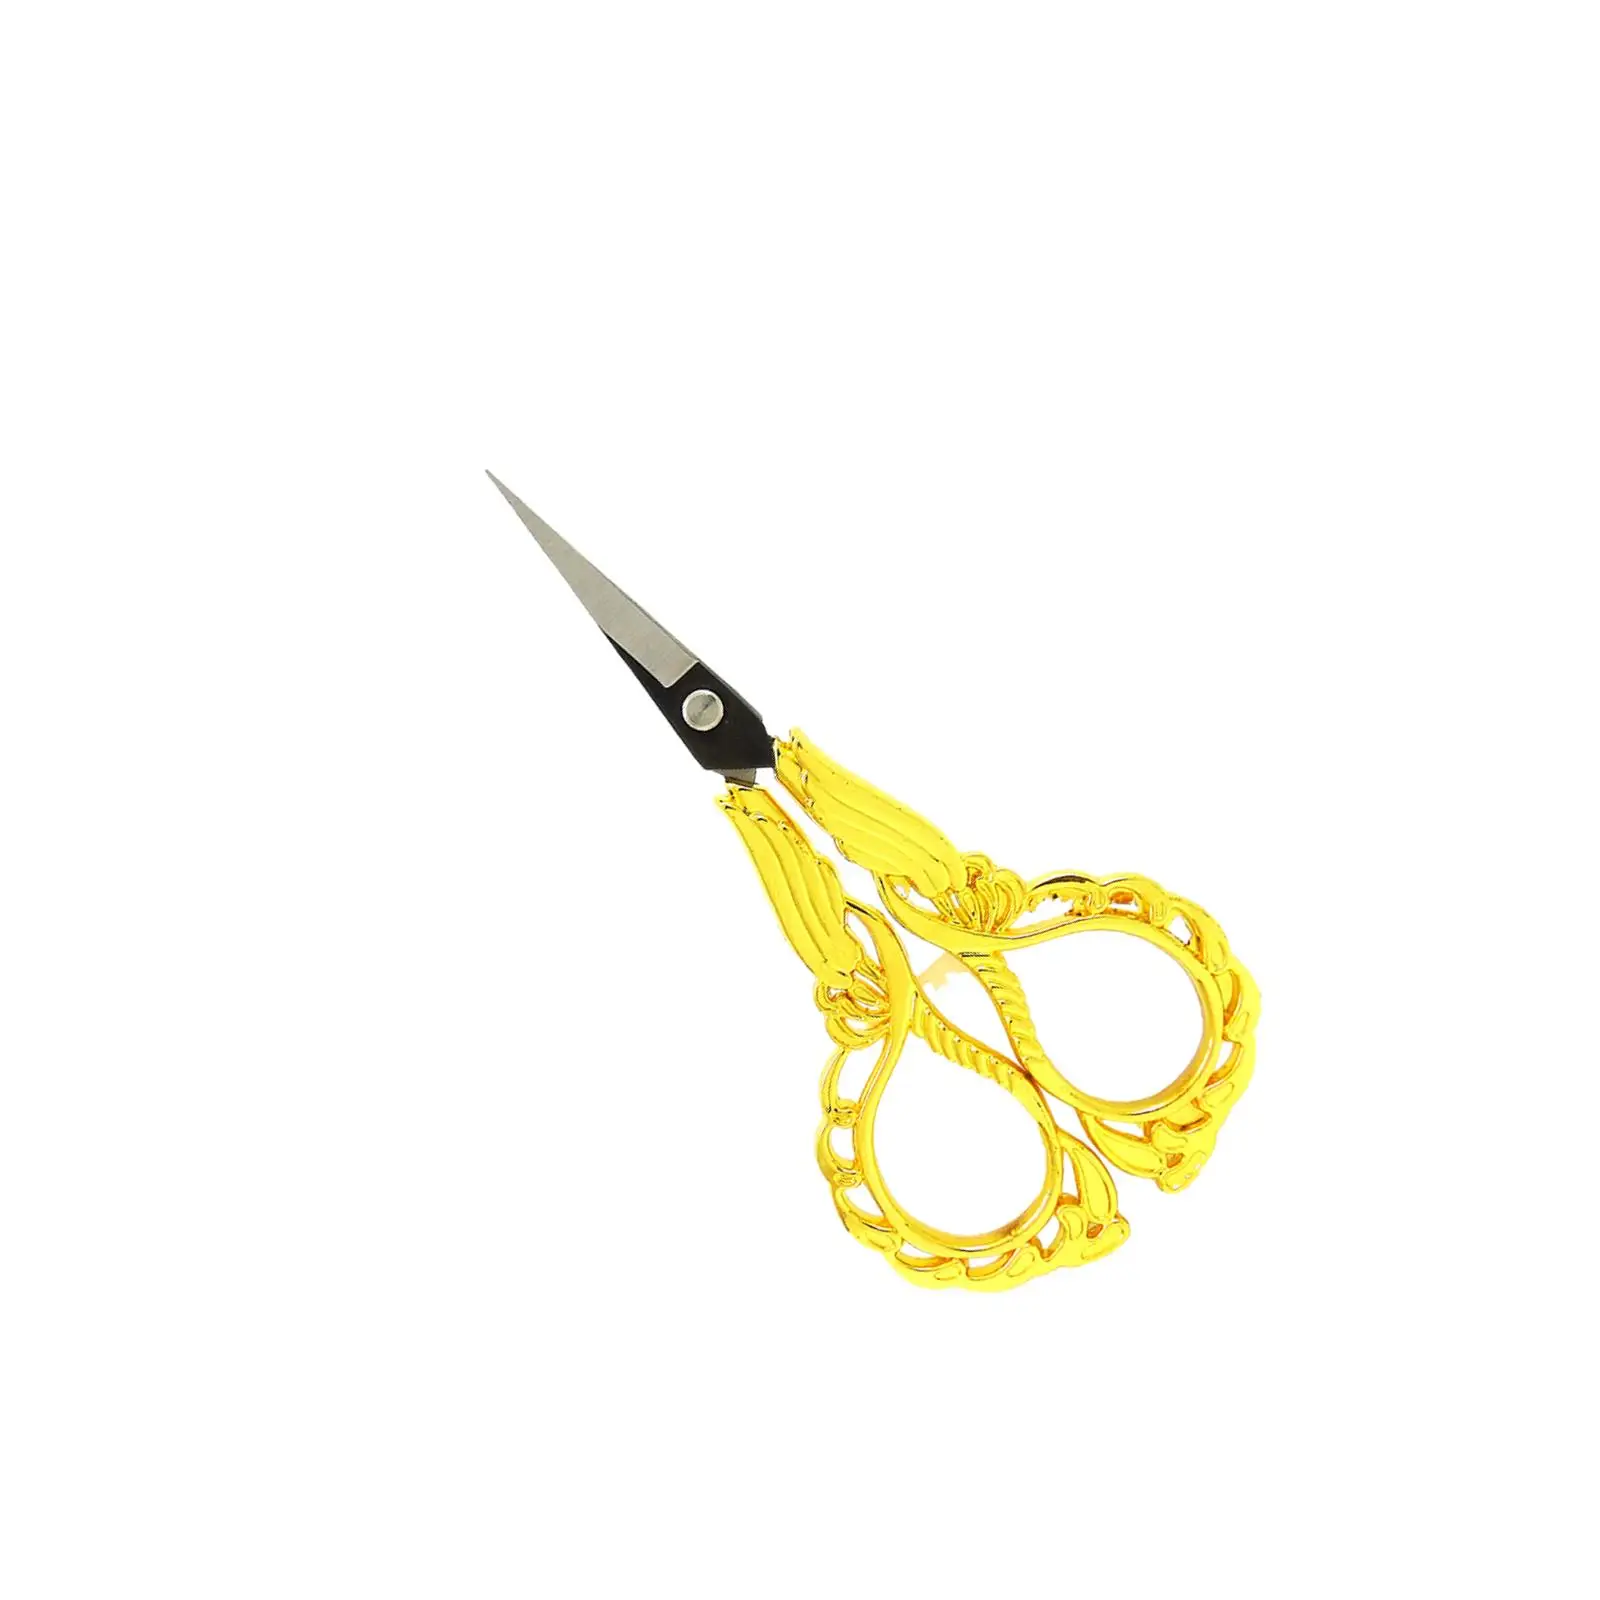 Embroidery Scissors Retro Style Cutting Tool Orchid Scissors for Cloth Cutting Household Artwork Sewing Accessories DIY Fabric